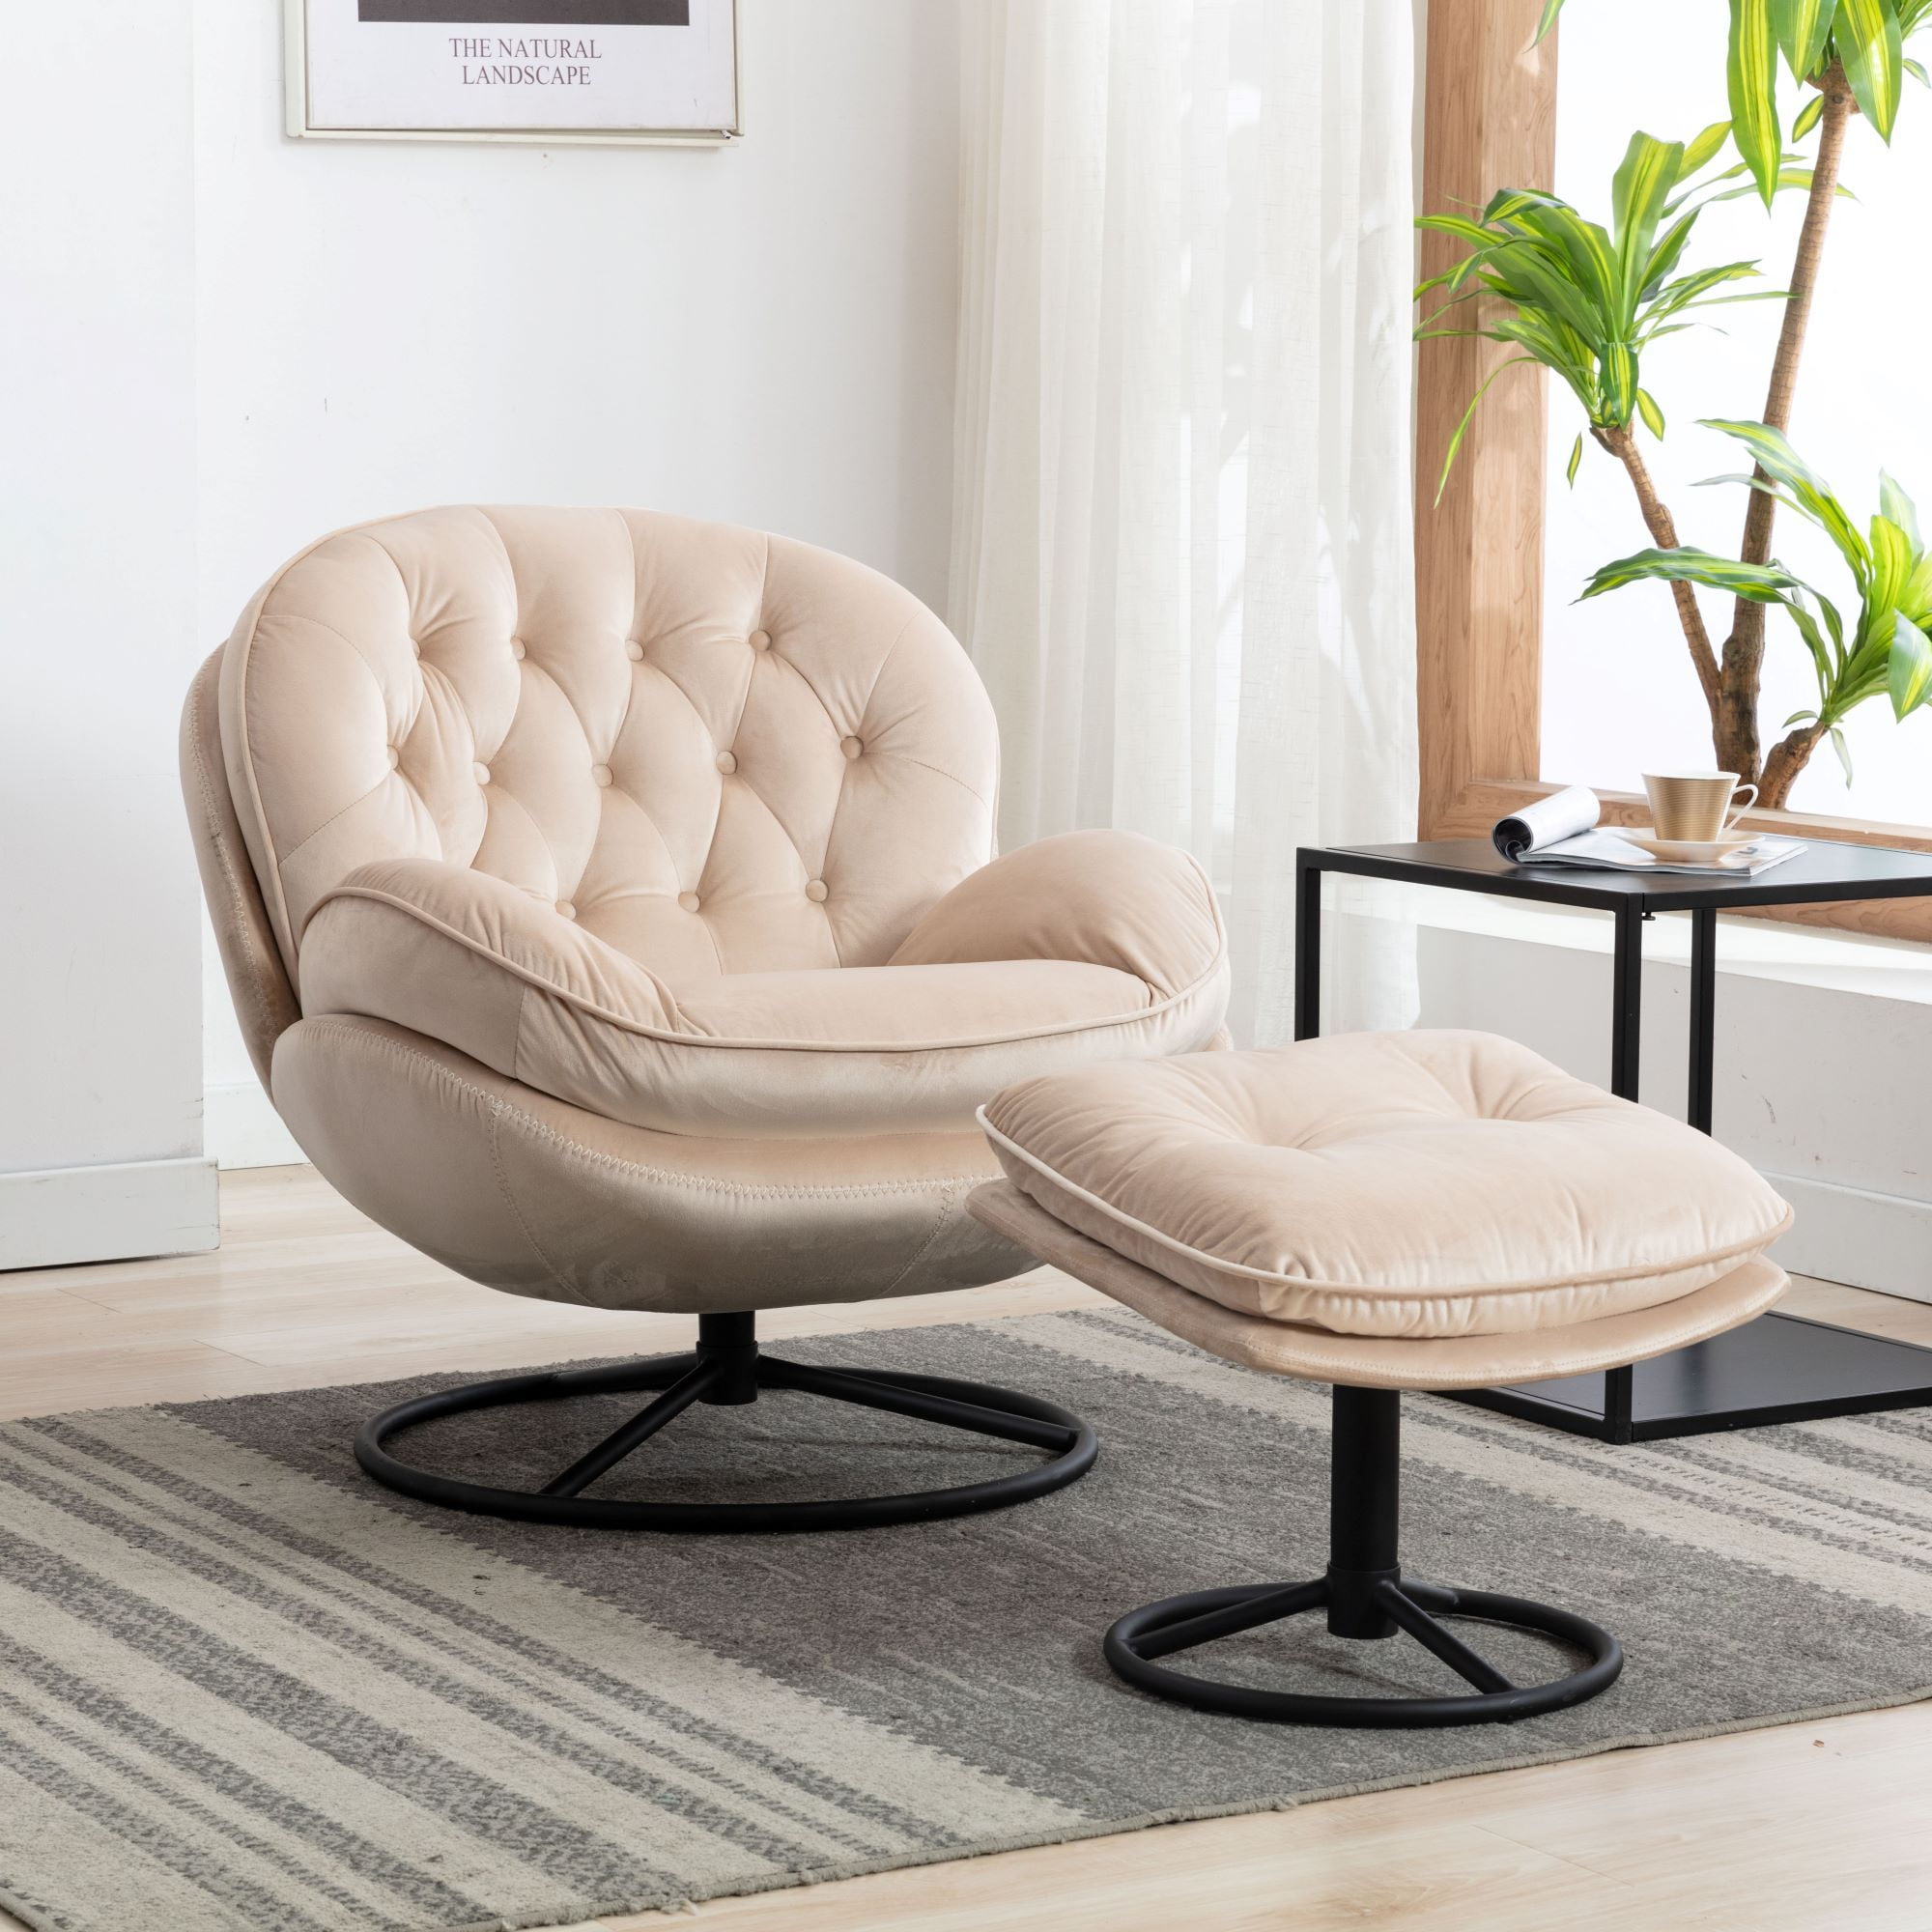 Comfy Armchair With Footrest : 10 Iconic Lounge Chairs With Footstools